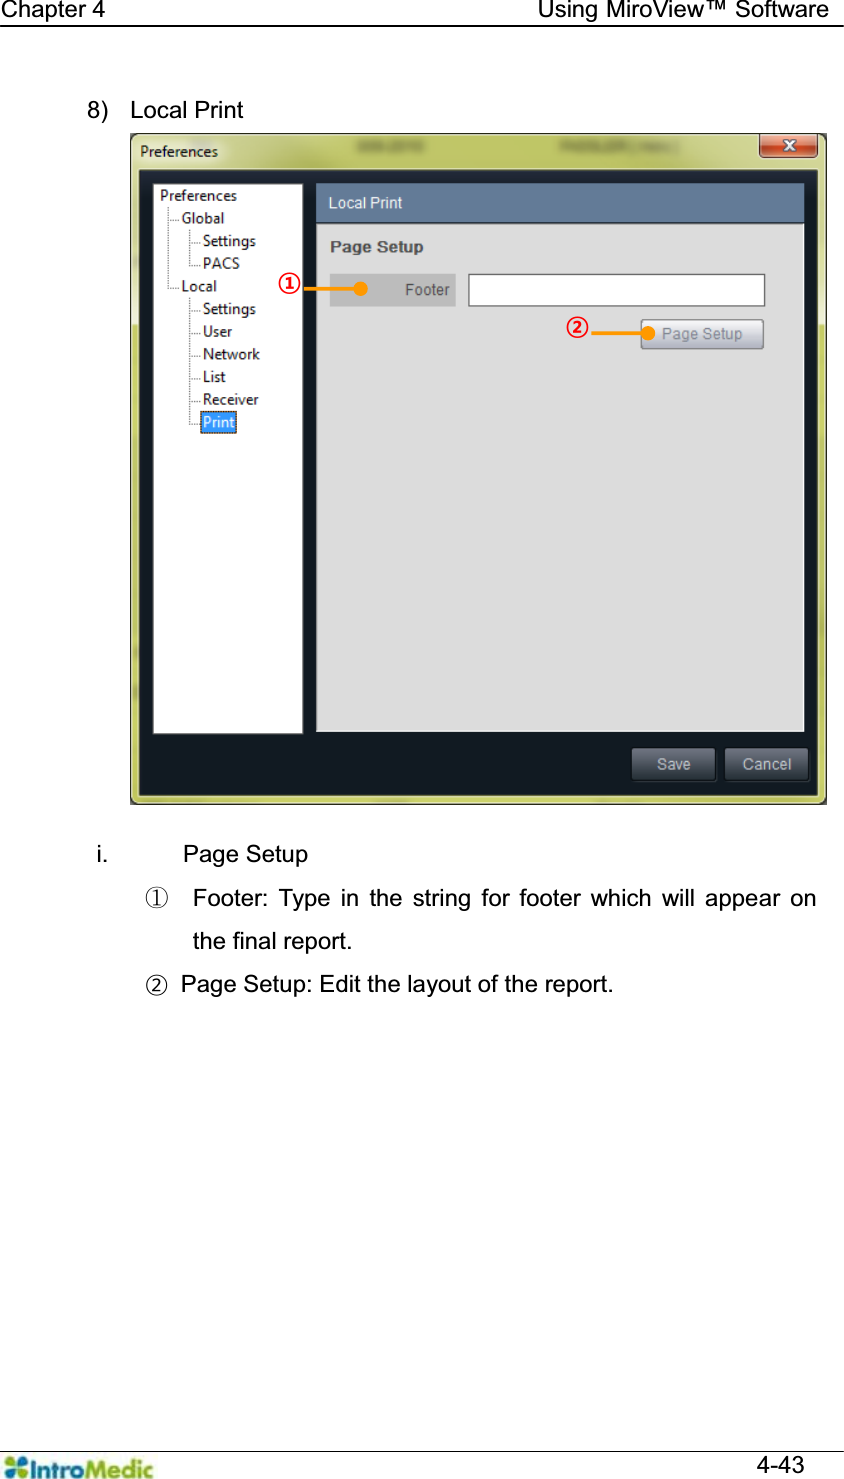   Chapter 4                                    Using 0LUR9LHZ Software  4-43  8) Local Print  i. Page Setup ཛ  Footer: Type in the string for footer which will appear on the final report. ¤  Page Setup: Edit the layout of the report. ¢ £ 